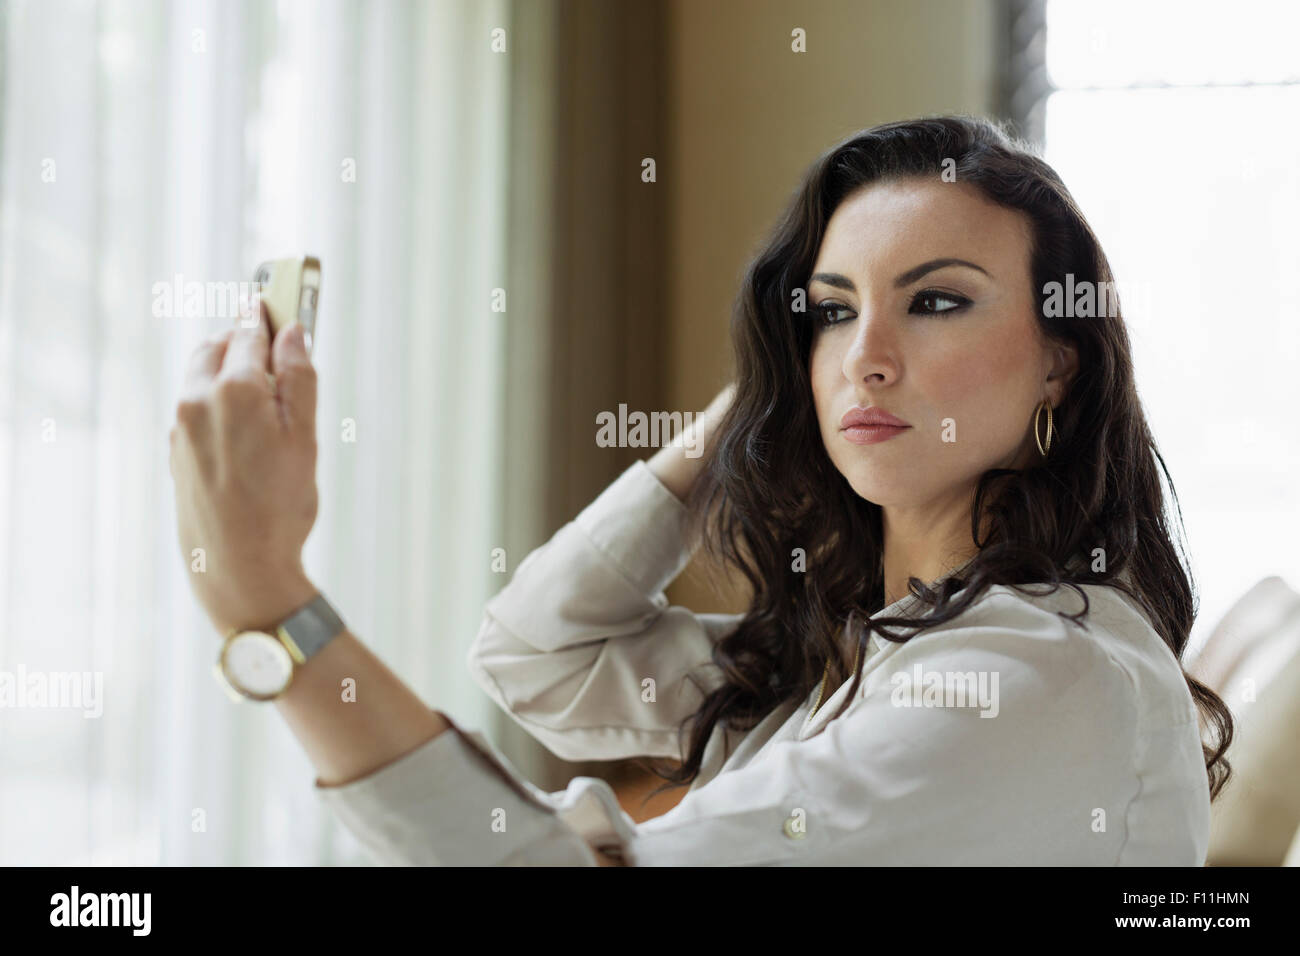 Mixed race businesswoman checking her makeup in hotel lobby Stock Photo